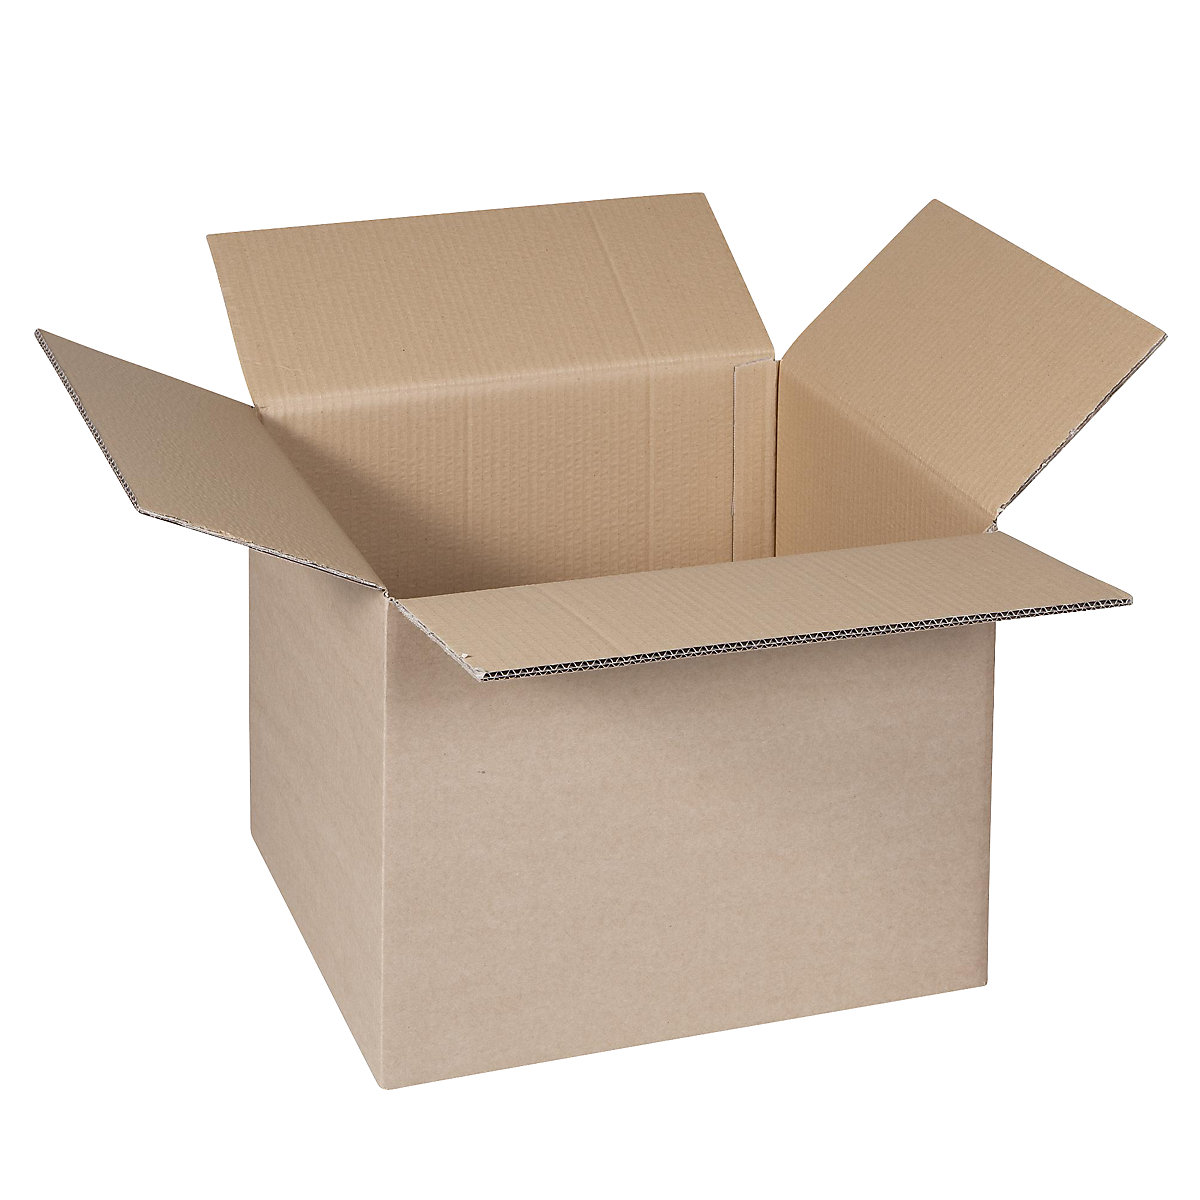 Folding cardboard box, FEFCO 0201, made of double fluted cardboard, internal dimensions 605 x 580 x 450 mm, pack of 50-20